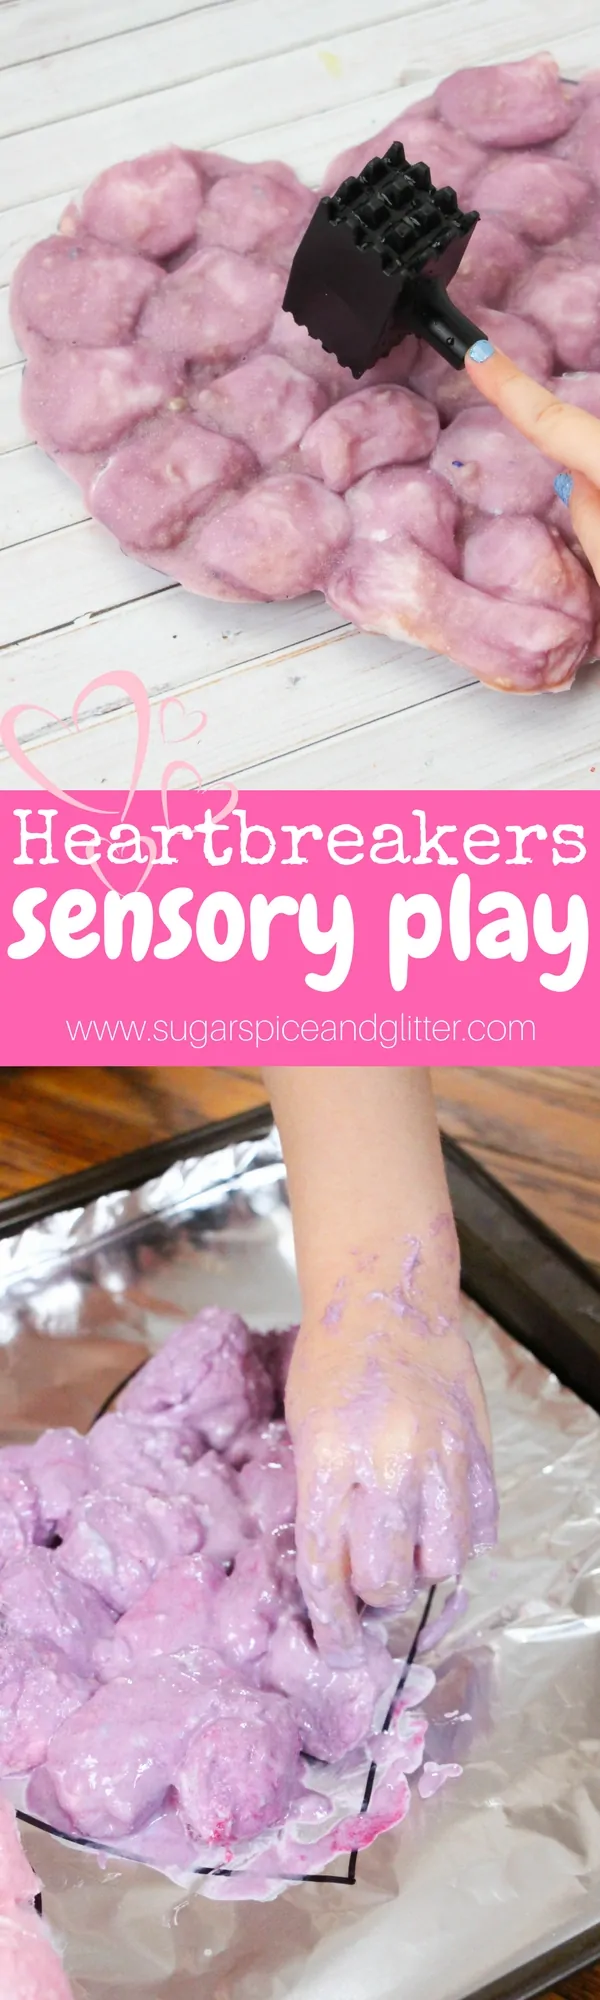 A fun heart-themed sensory play activity for Valentine's Day! Baked cotton balls are so much for for kids to smash and rip apart - especially little heartbreakers!